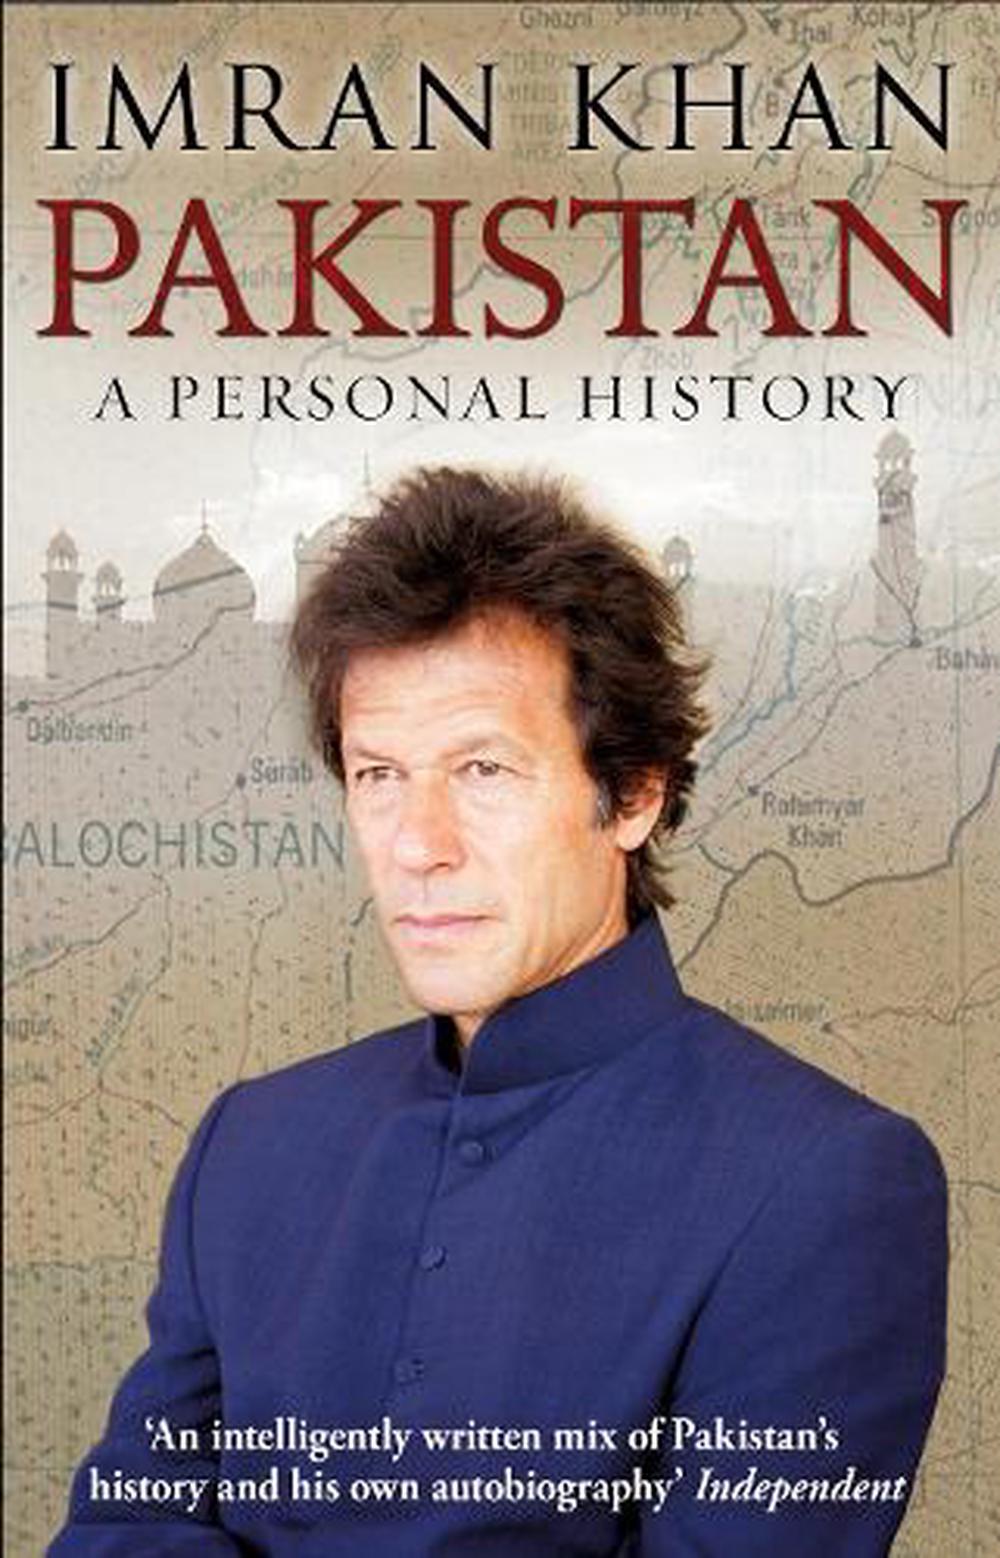 Pakistan by Imran Khan, Paperback, 9780857500649 | Buy online at The Nile